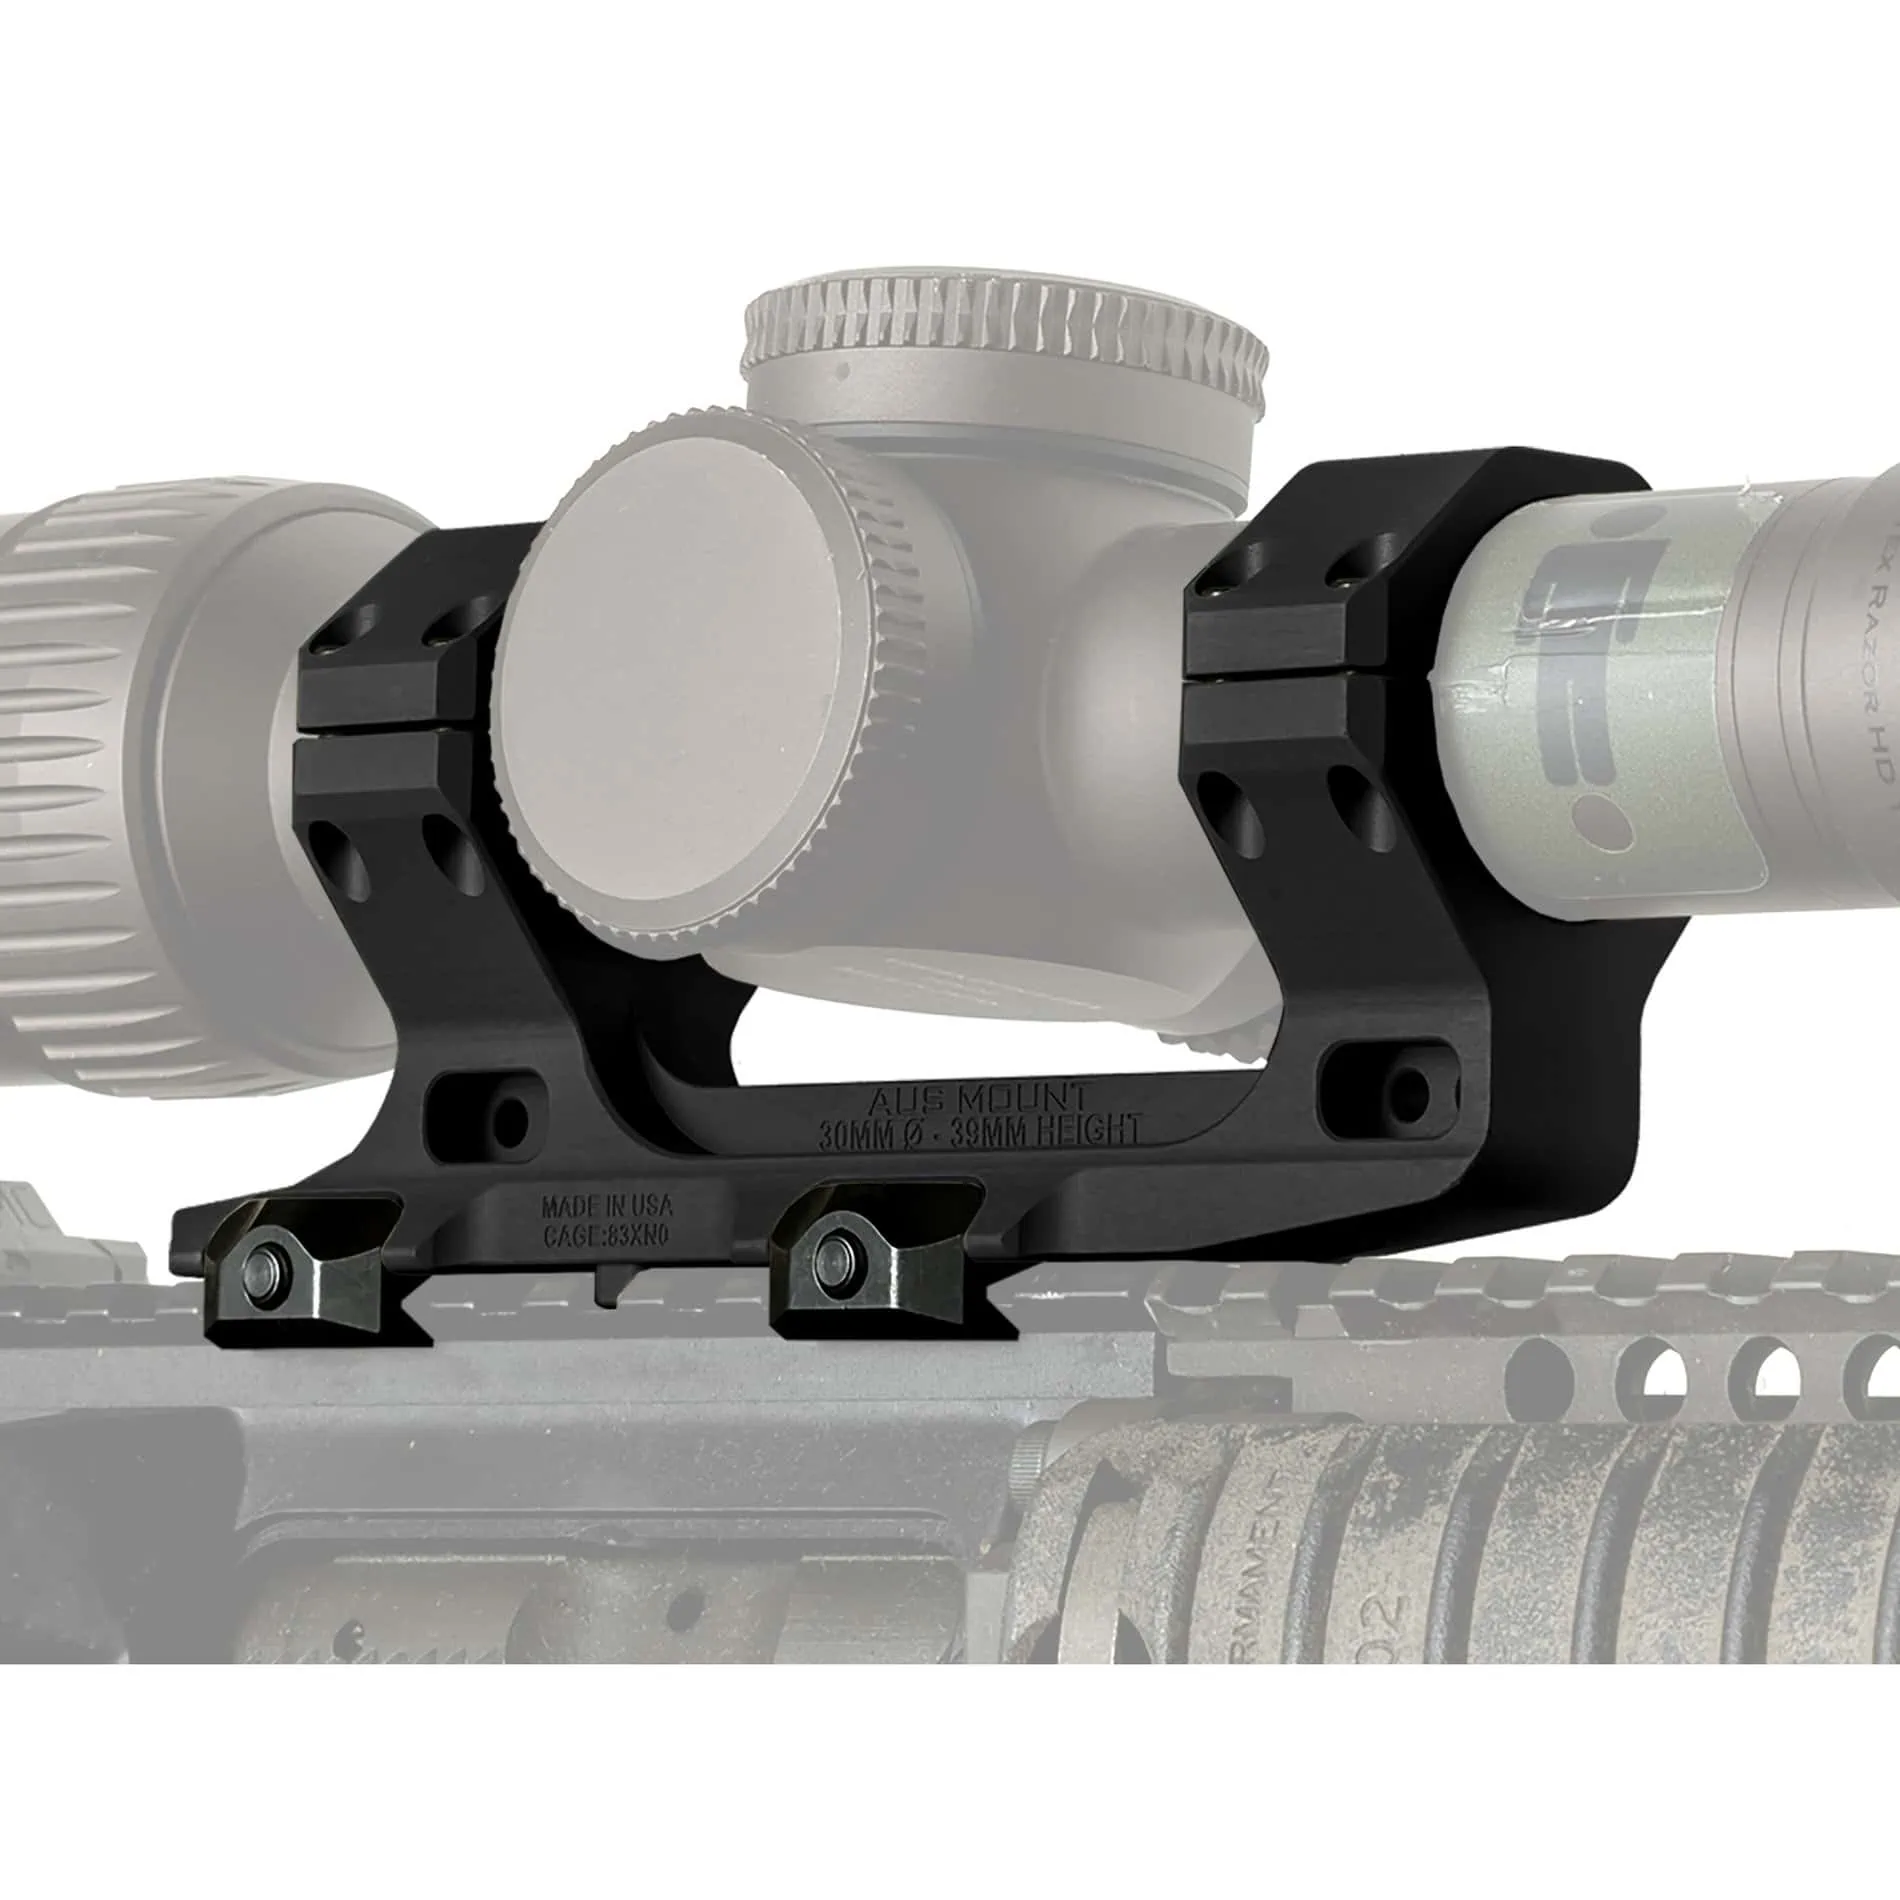 Reptilia AUS 30mm Scope Mount with 1.45 inch Bore Height - AT3 Tactical